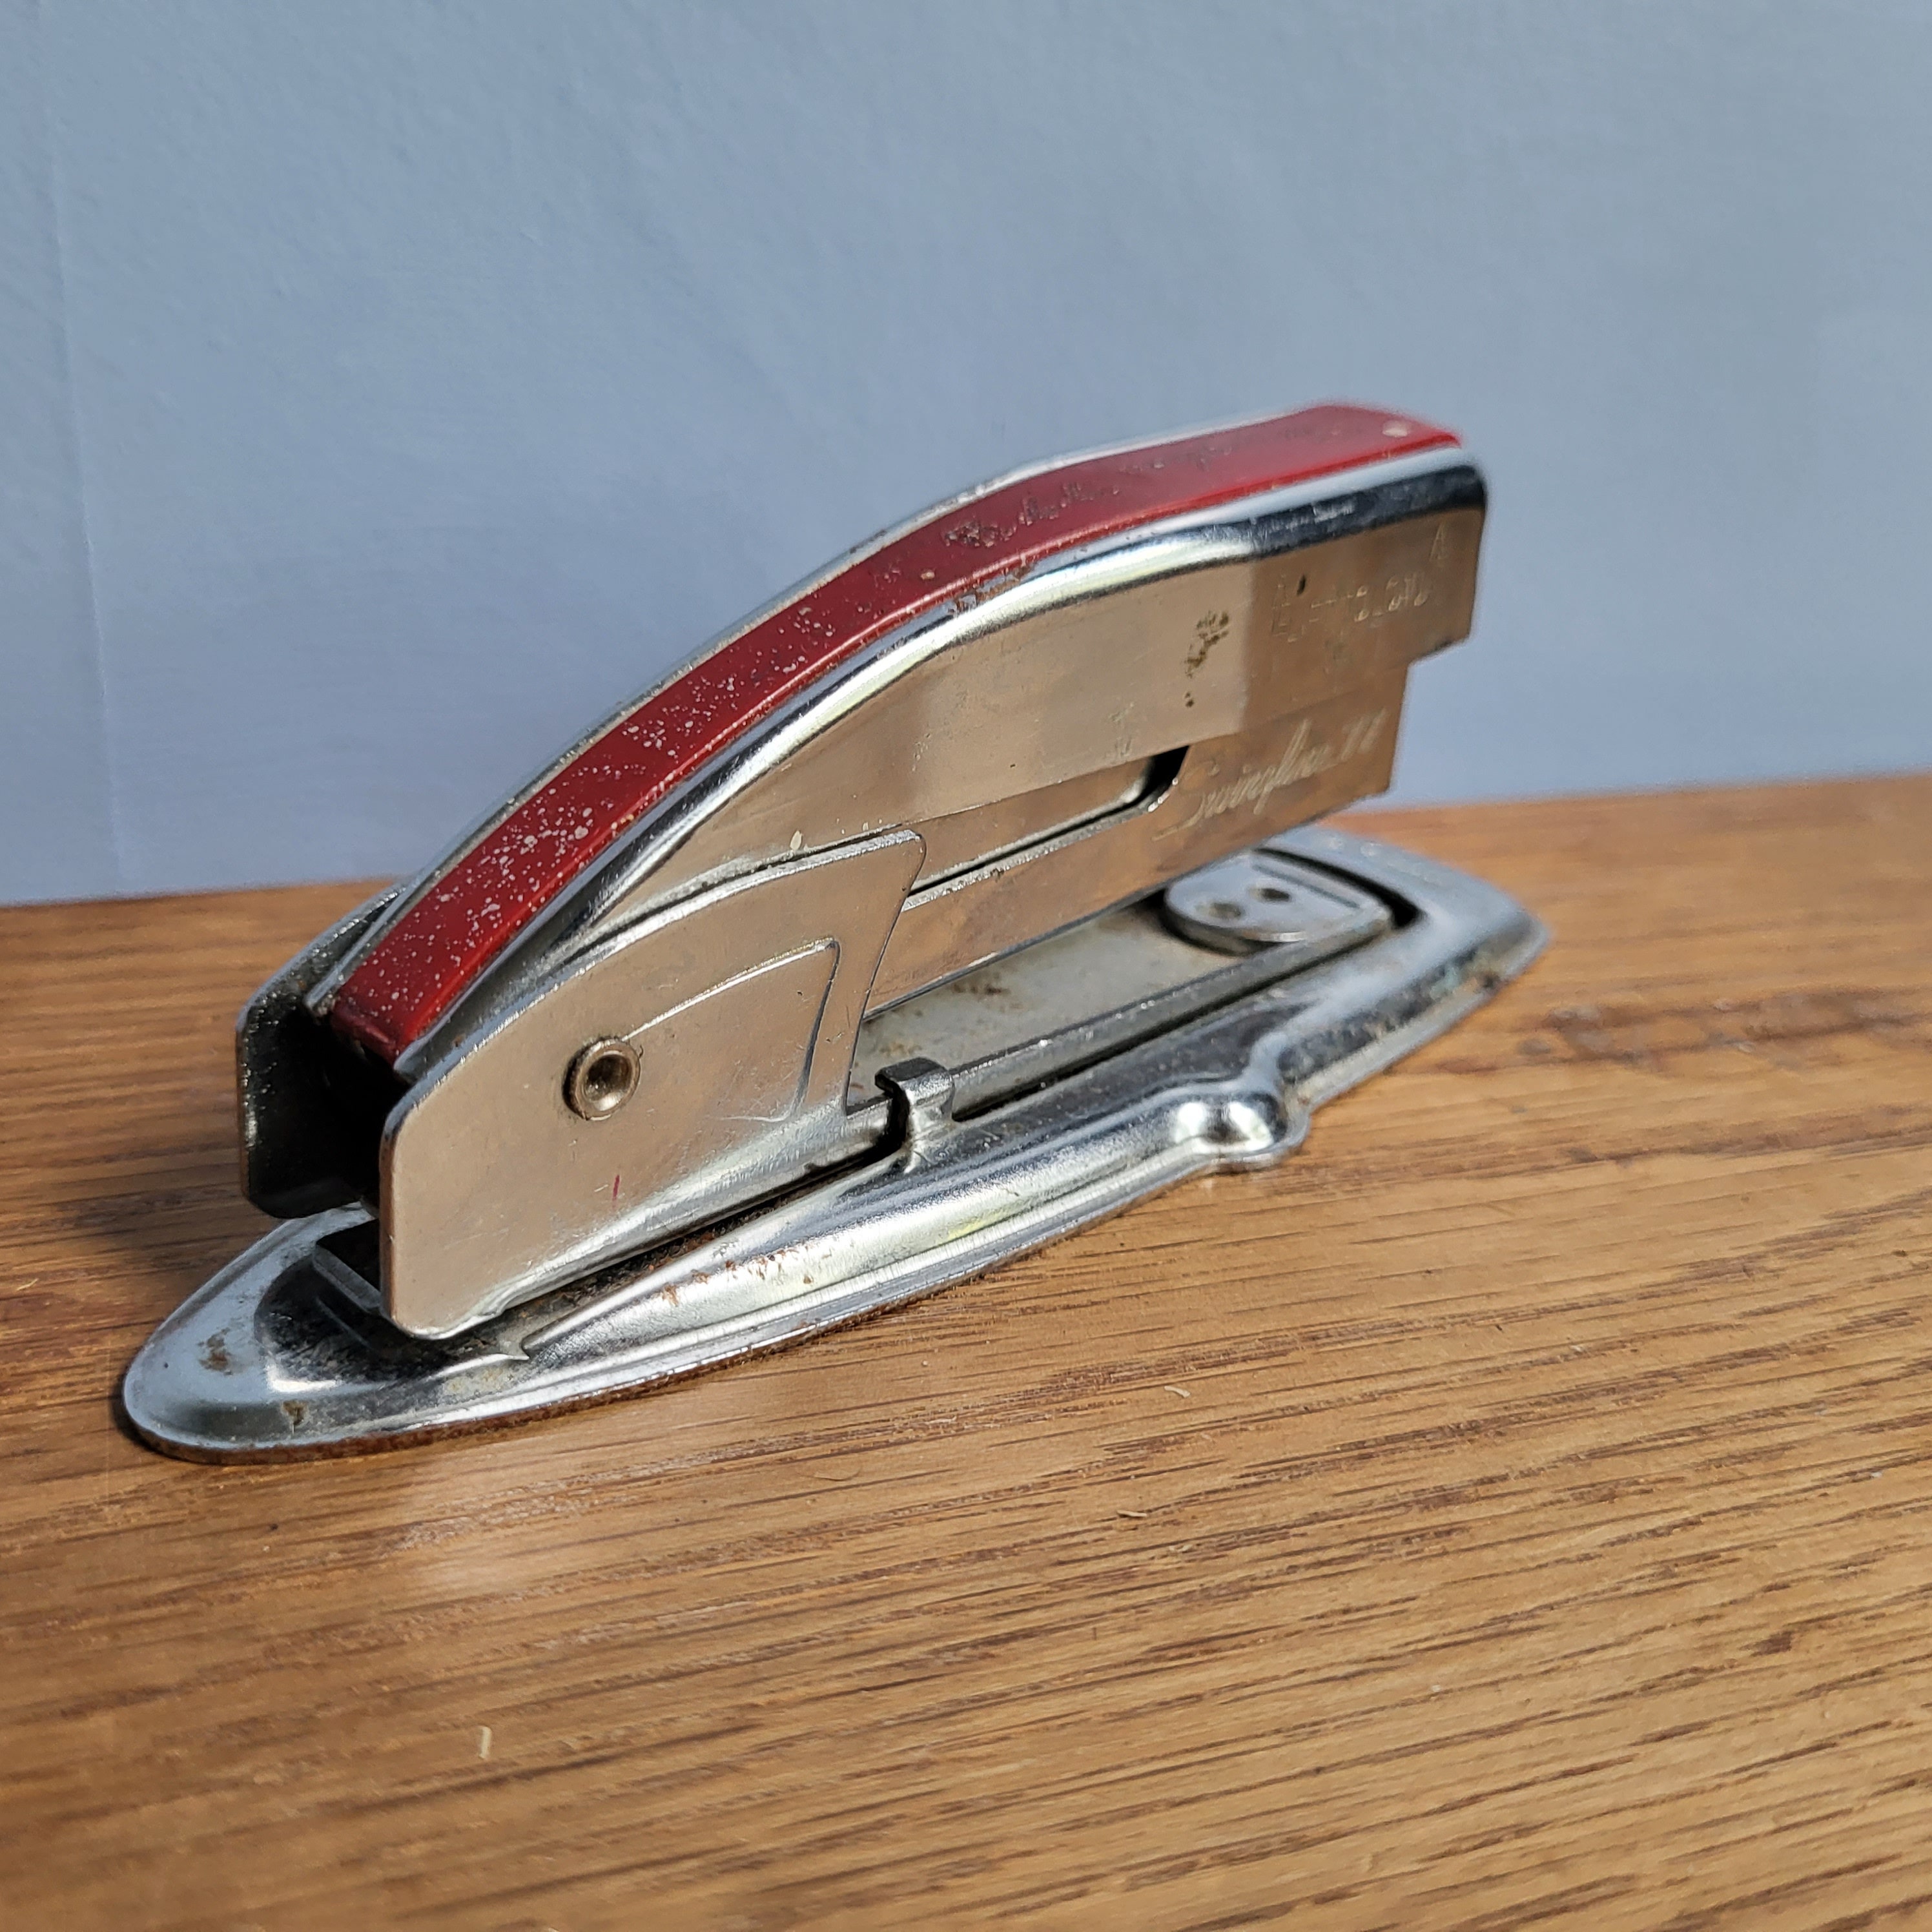 Vintage Battery Operated Hand Held Sewing Machine / Mini Stapler